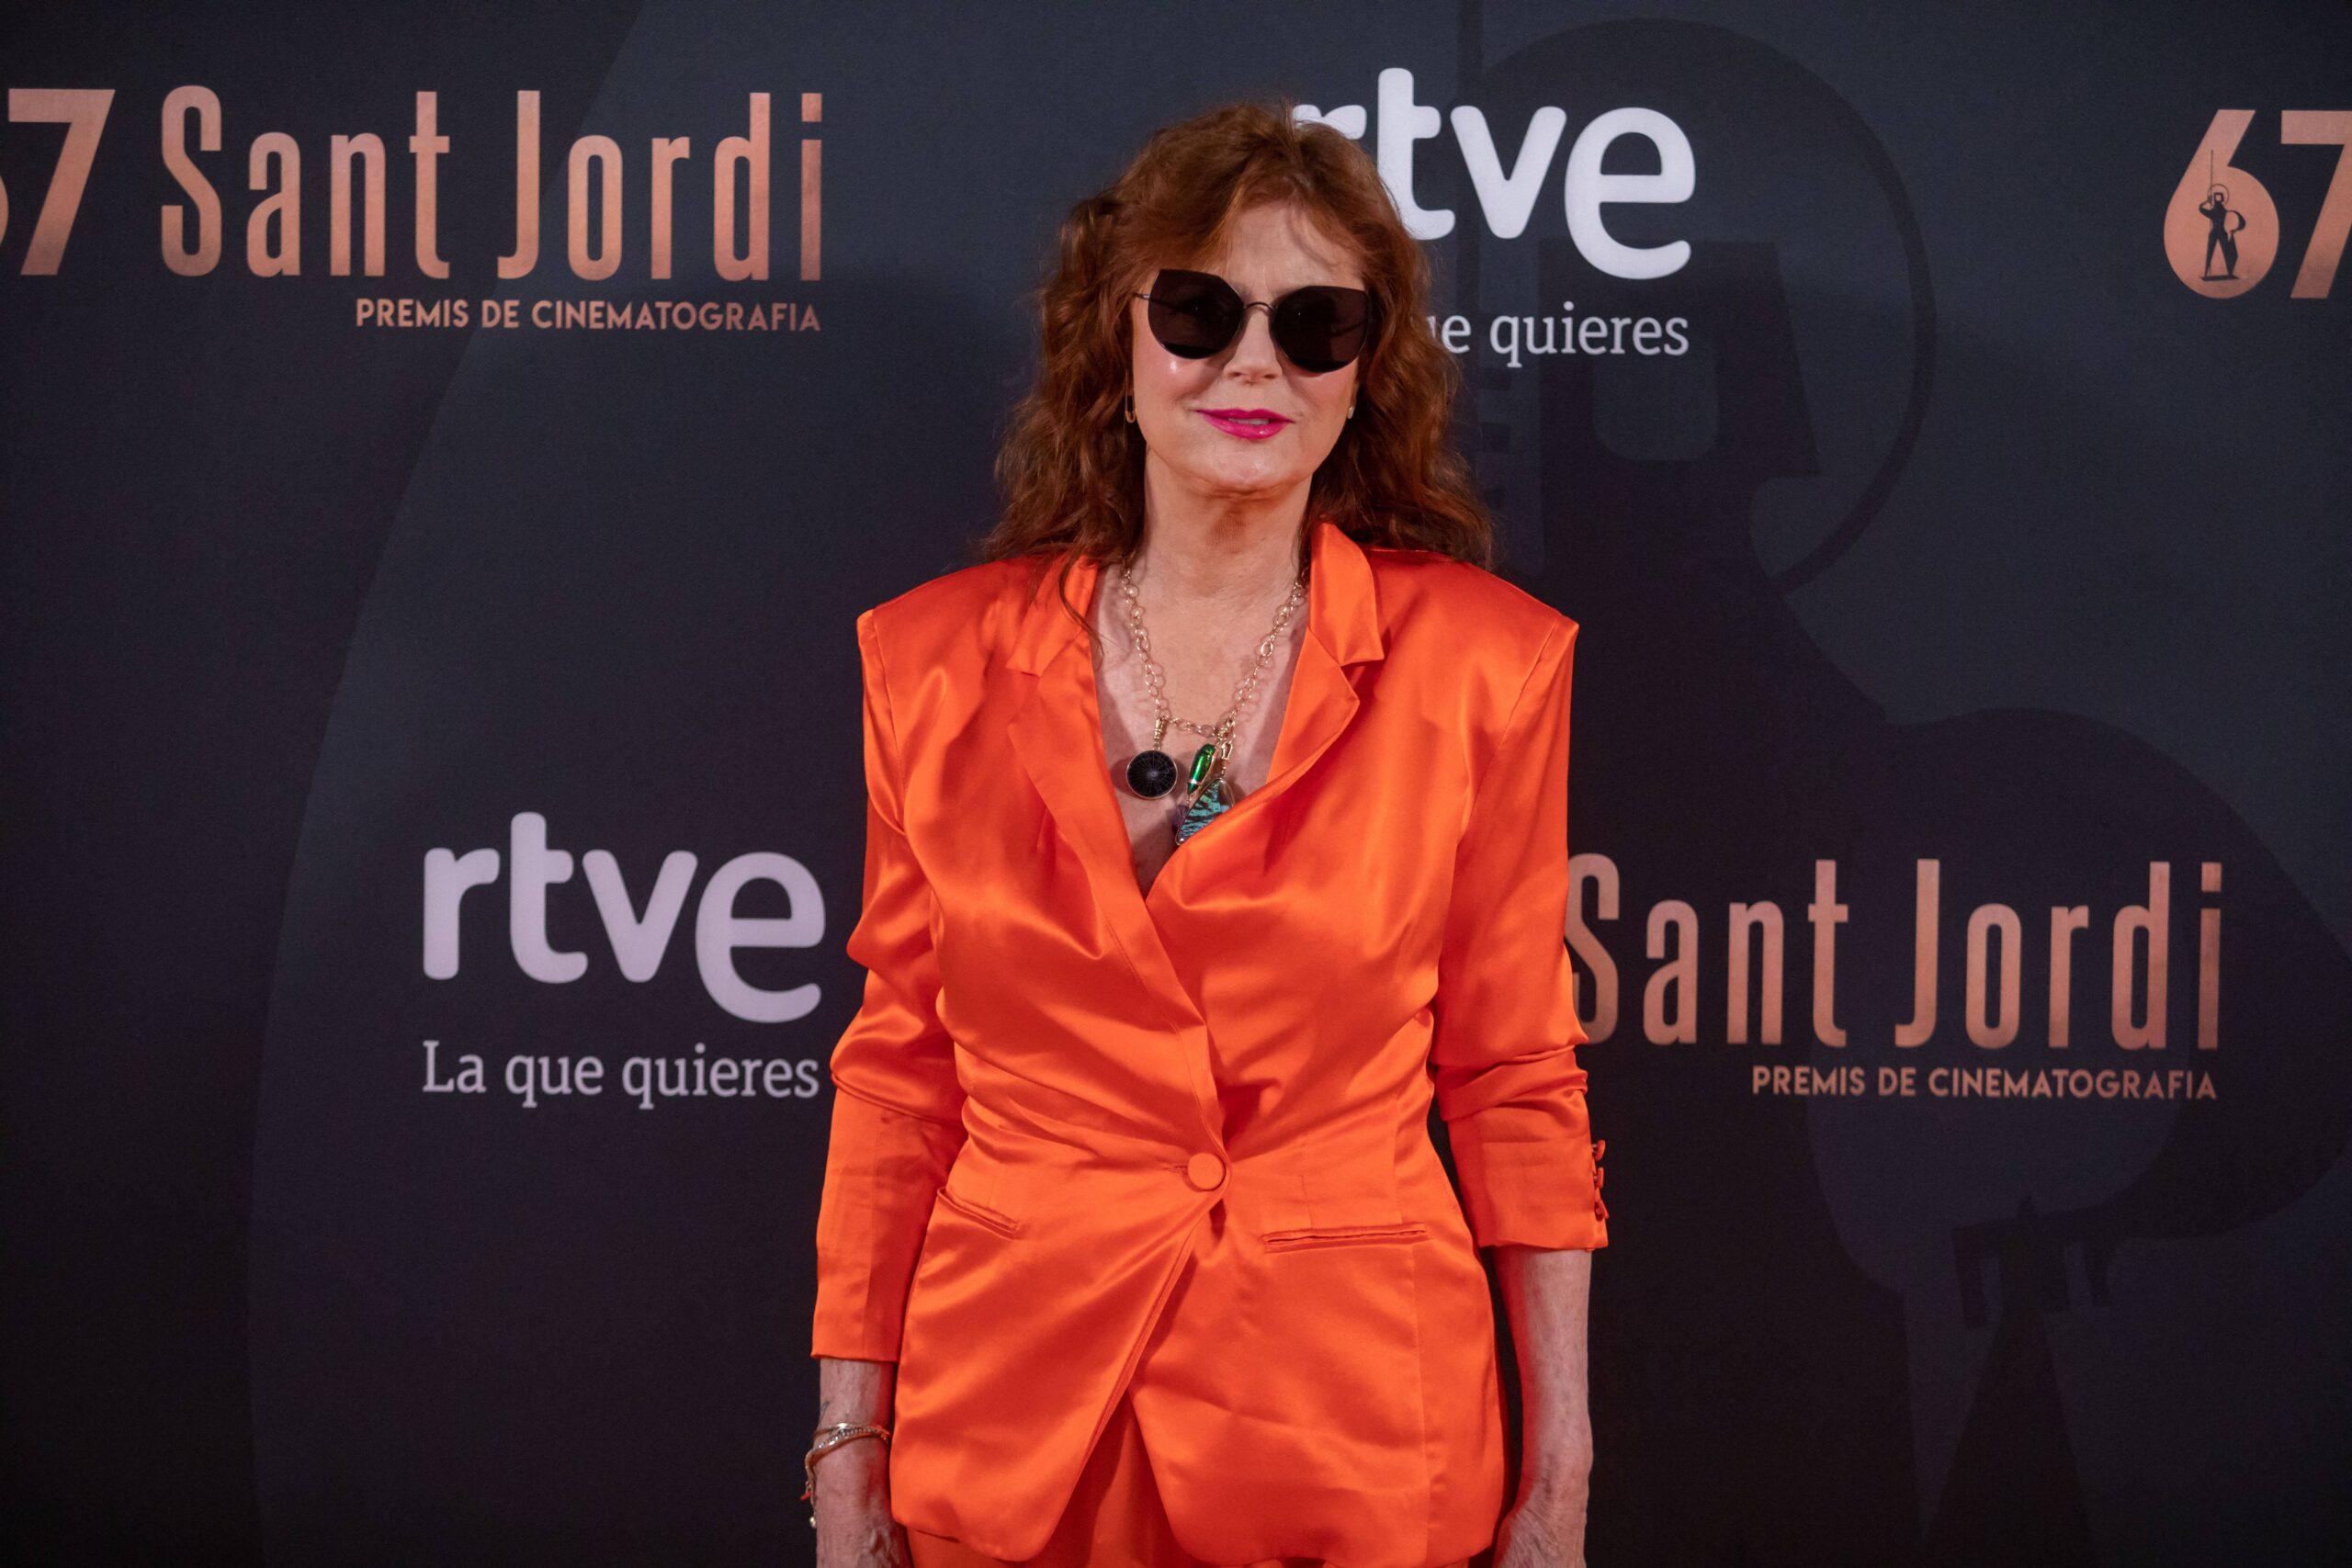 Susan Sarandon Dropped By Her Talent Agency Amid Pro-Palestine Support